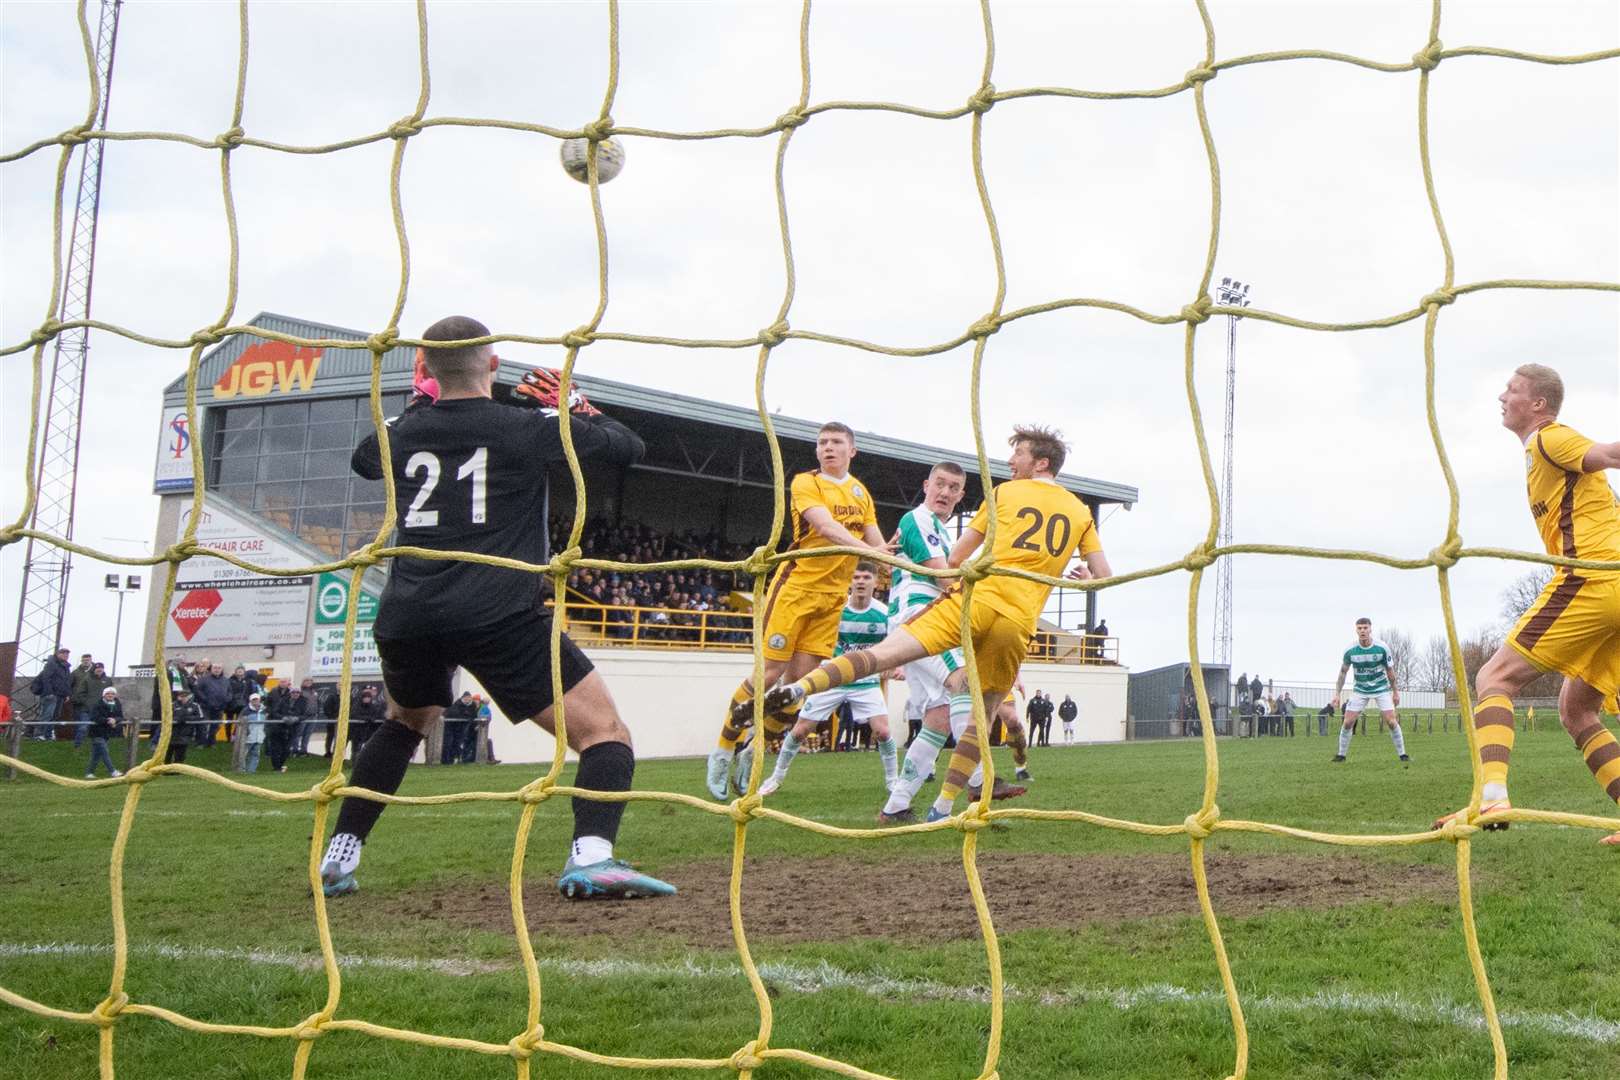 Buckie's Kyle Macleod heads home the Jags second goal of the afternoon. ..Forres Mechanics FC (2) vs Buckie Thistle FC (3) - Highland Football League 22/23 - Mosset Park, Forres 01/04/23...Picture: Daniel Forsyth..